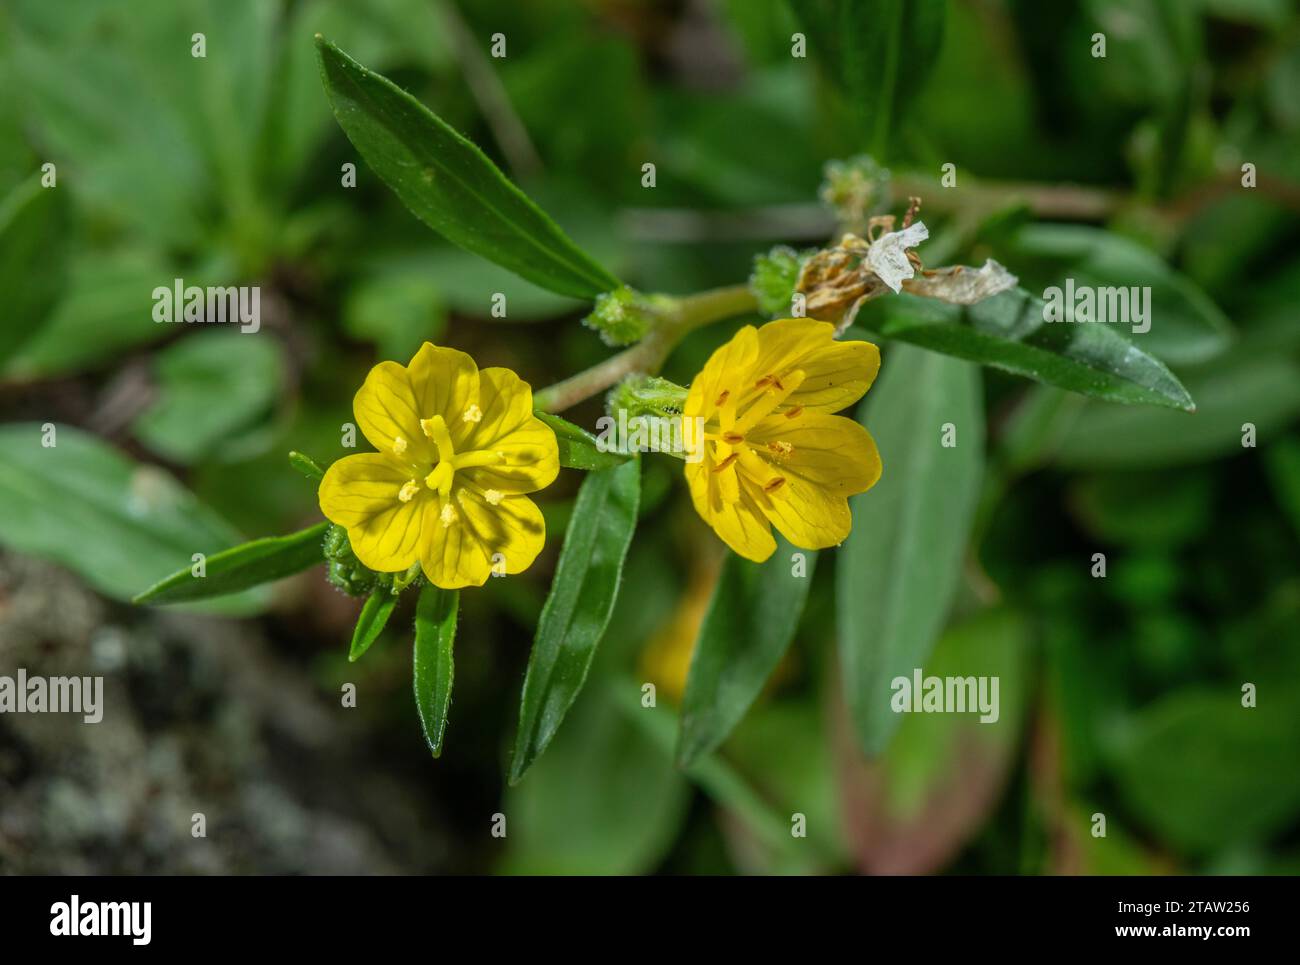 Small evening primrose, Oenothera perennis, in flower; from eastern North America Stock Photo